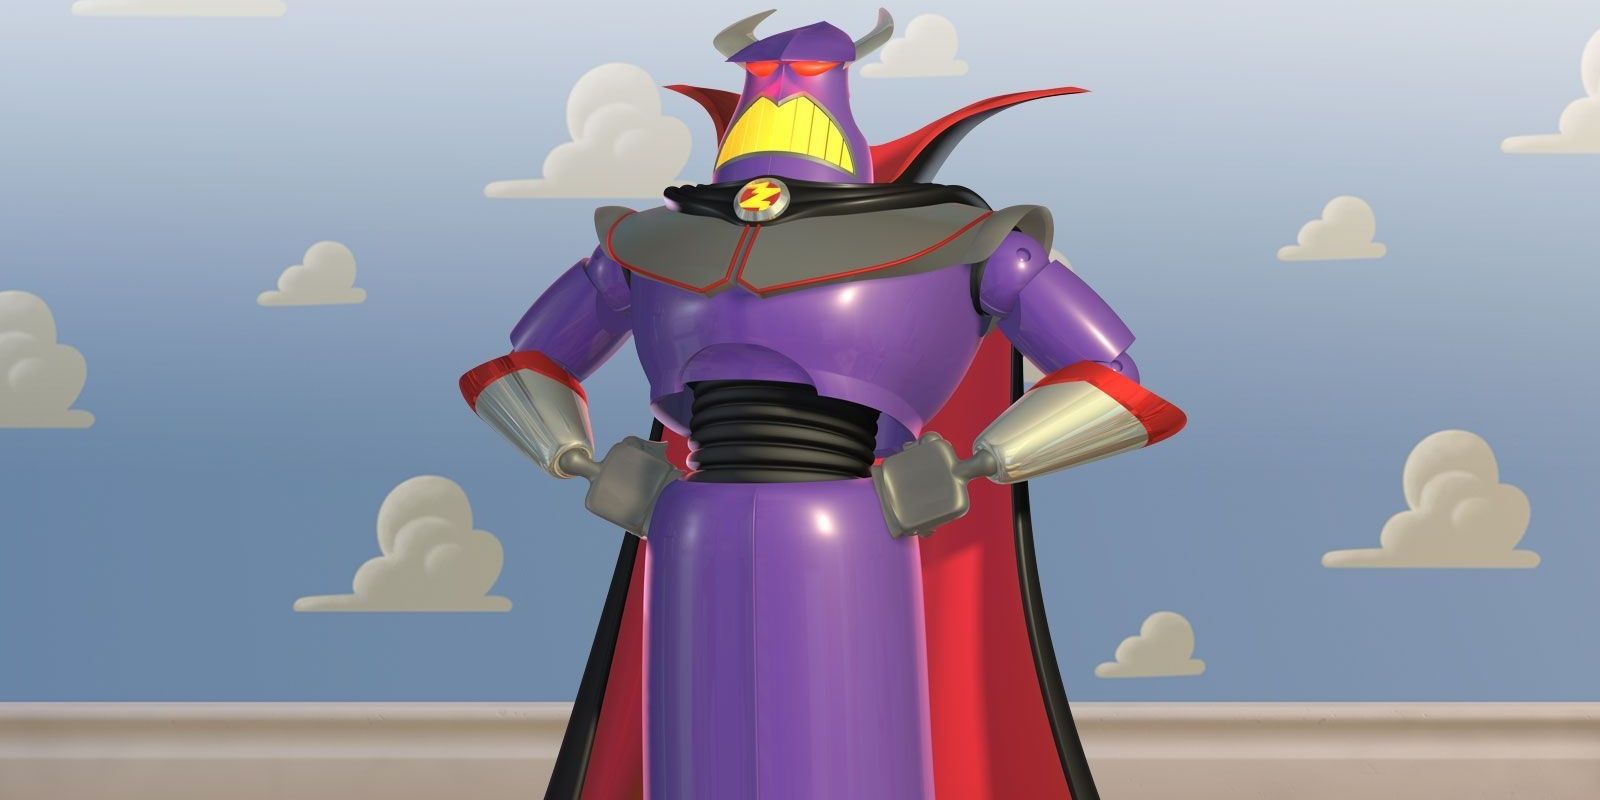 Emperor Zurg from the Toy Story franchise